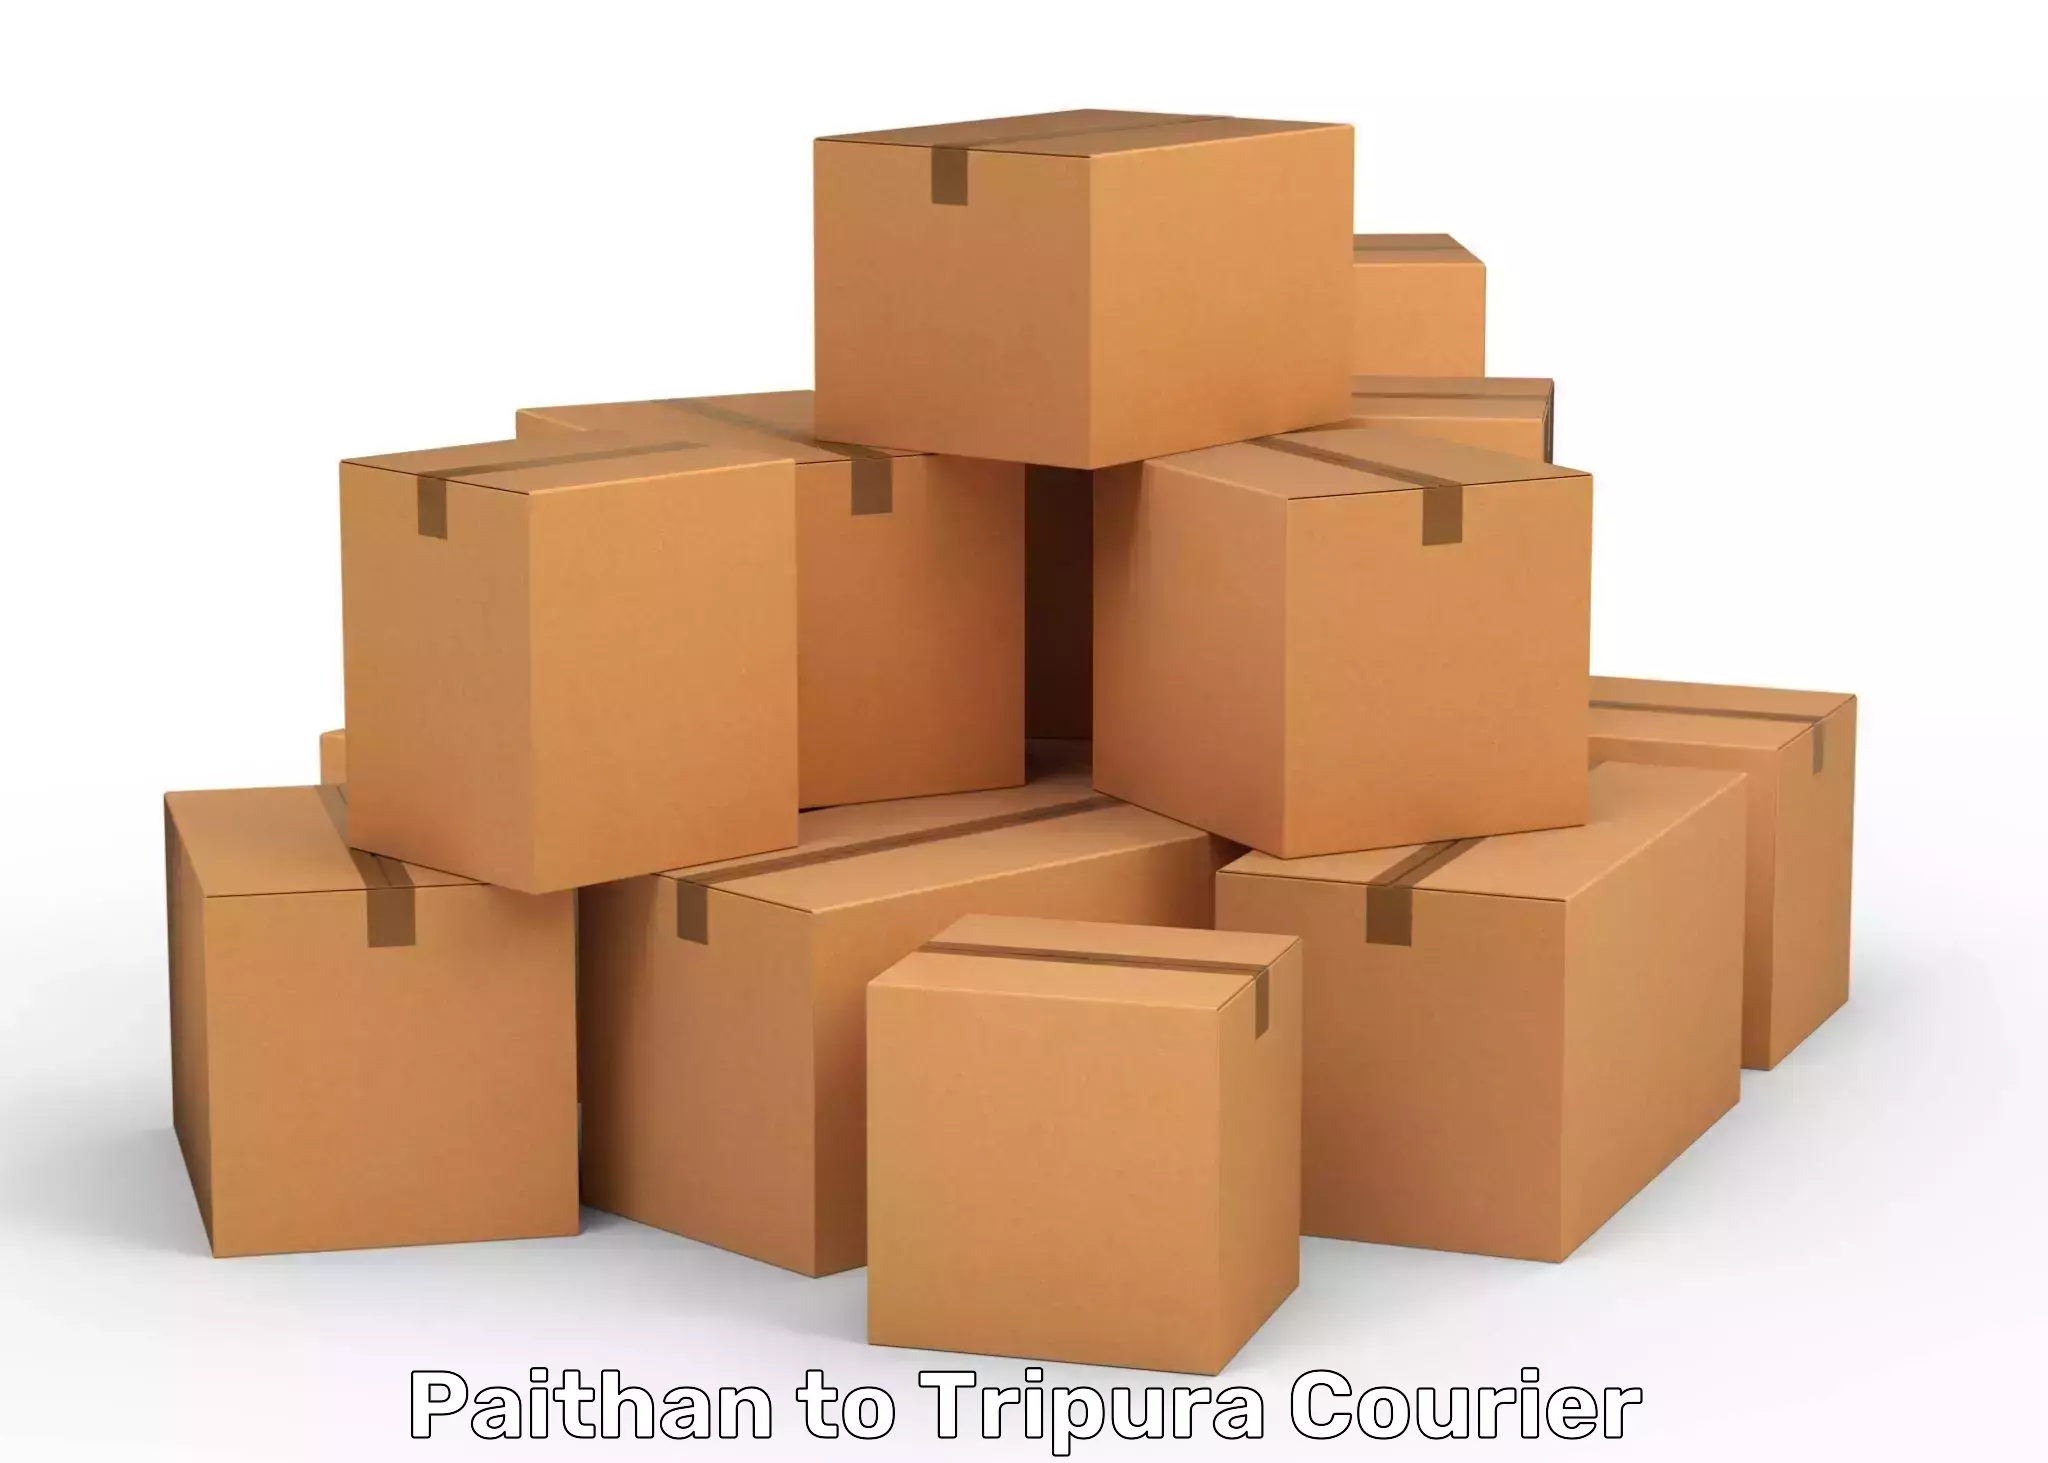 Efficient order fulfillment in Paithan to Tripura